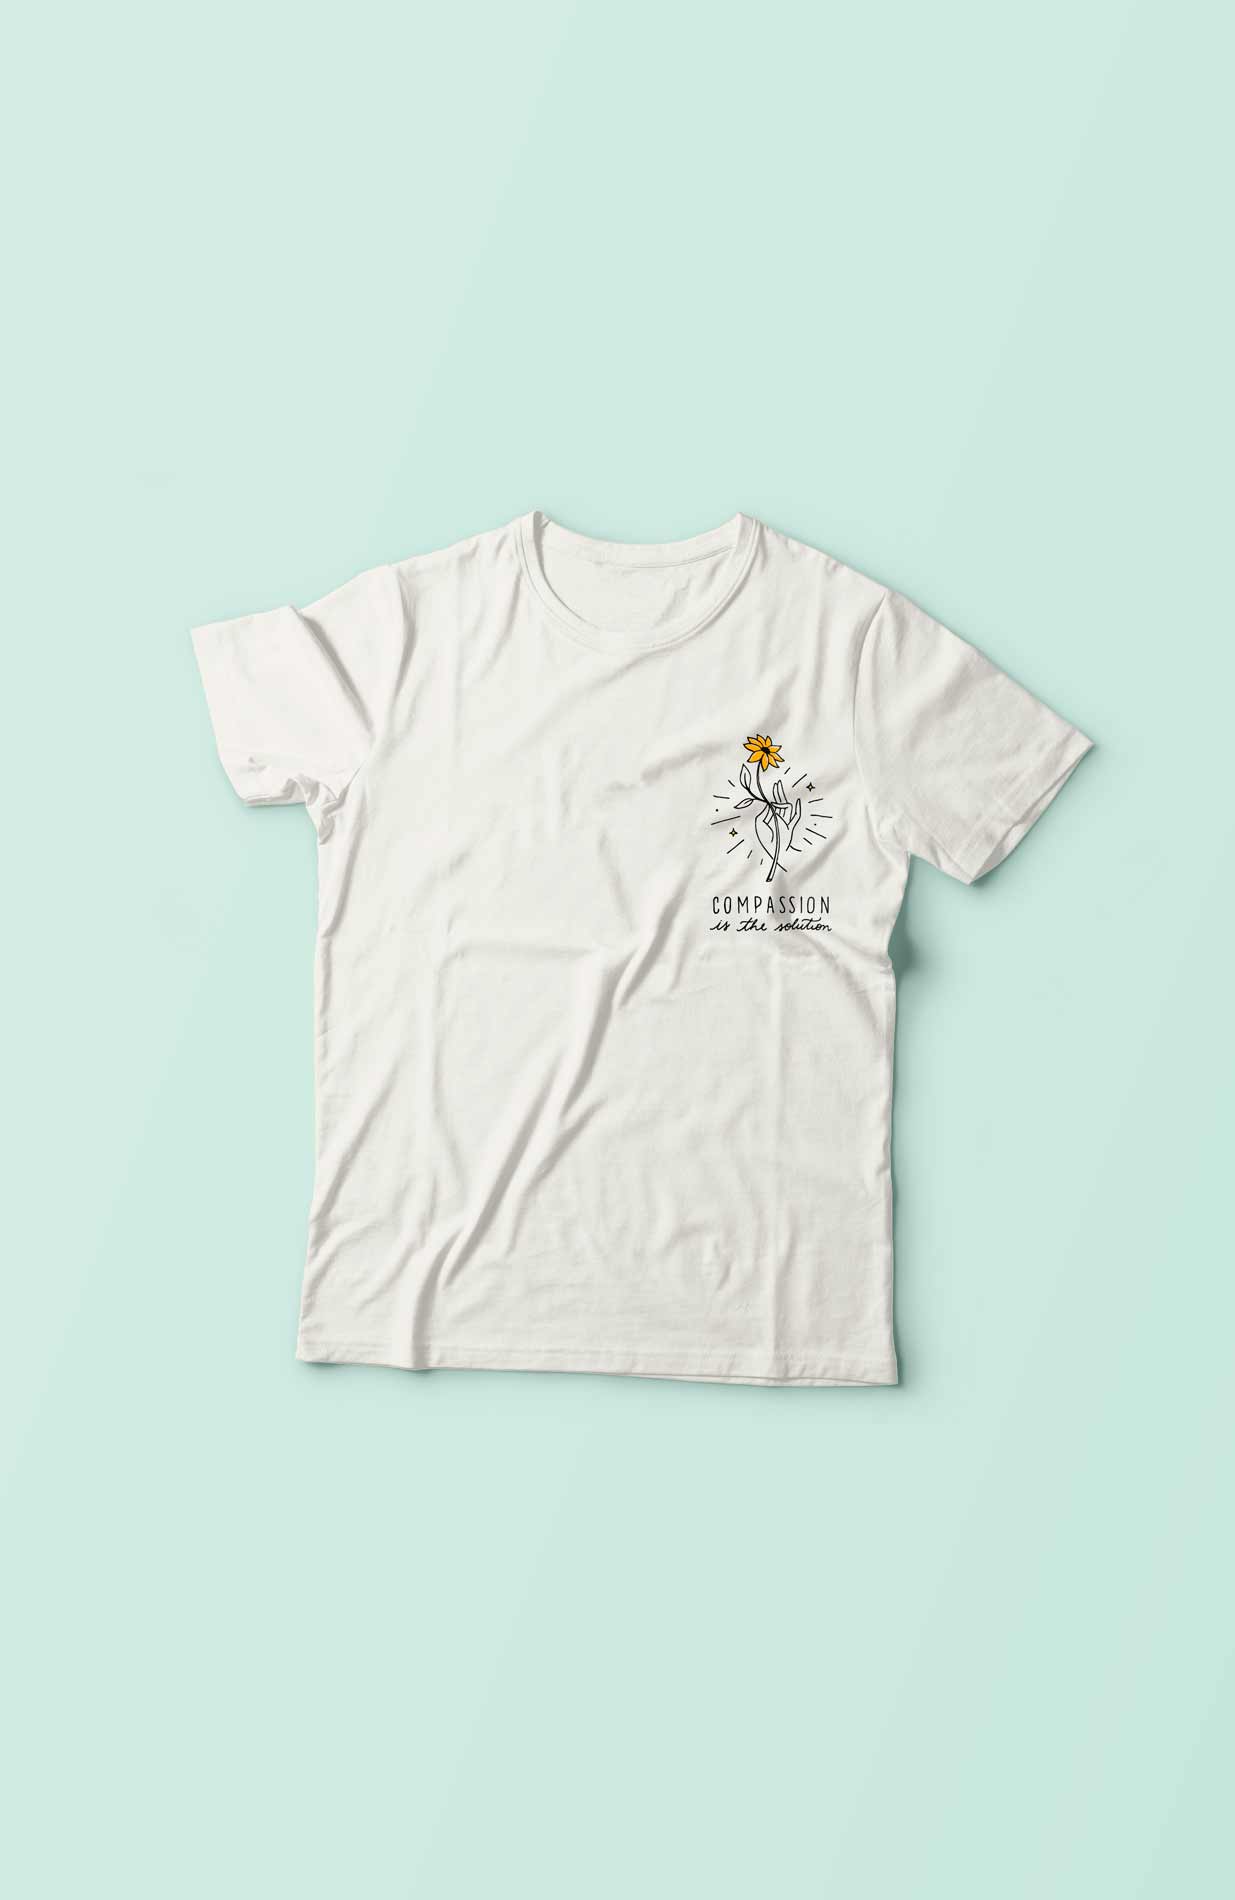 Camiseta compassion is the solution maghu